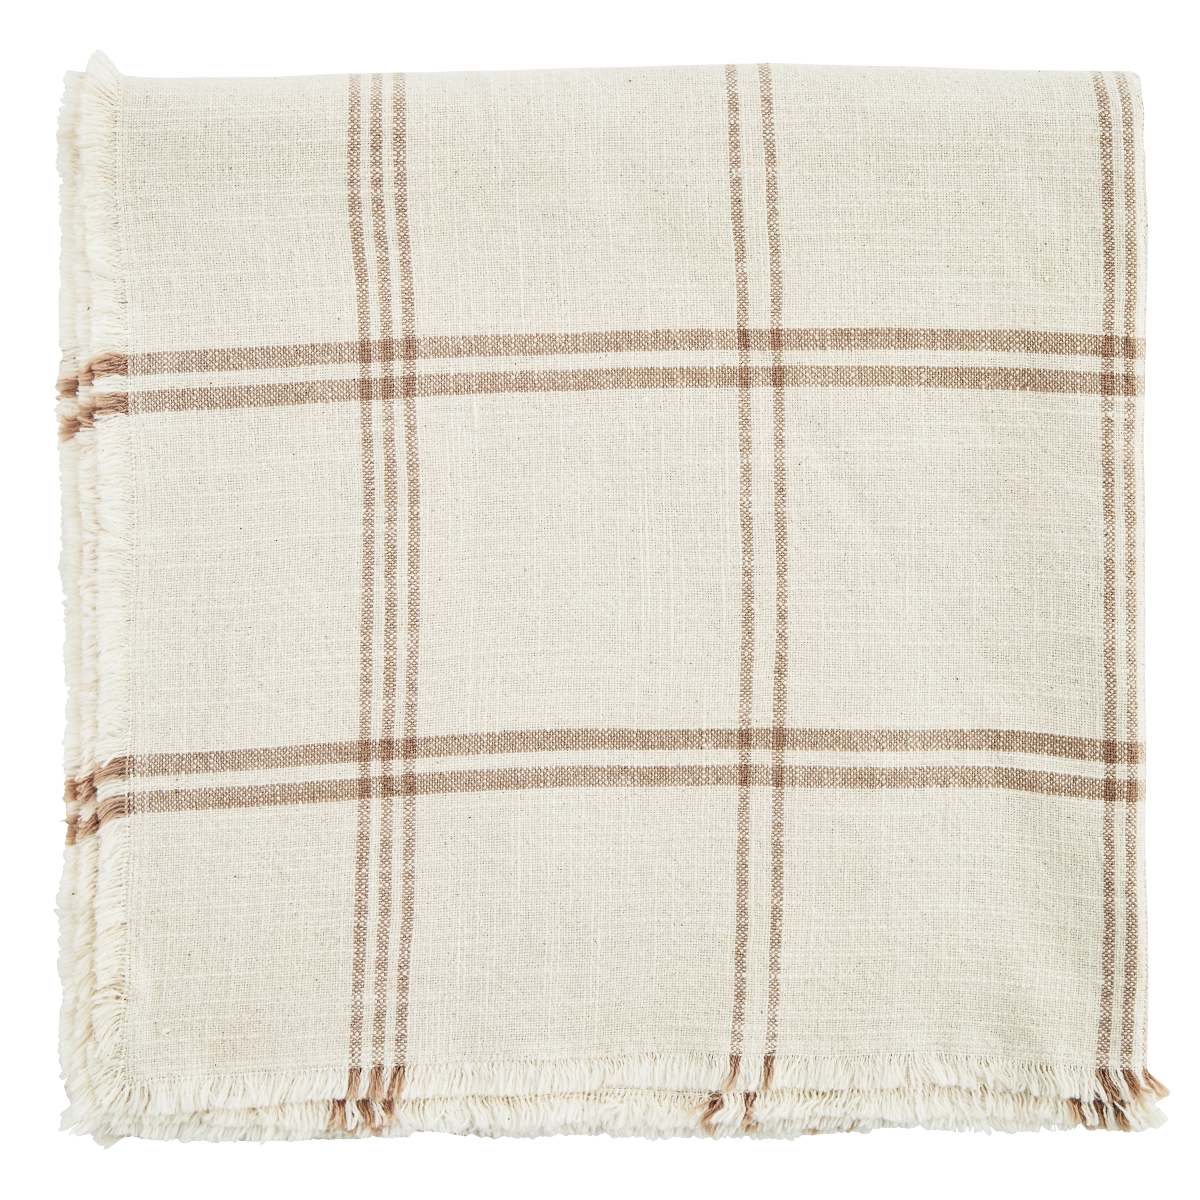 Checked table cloth w/ fringes